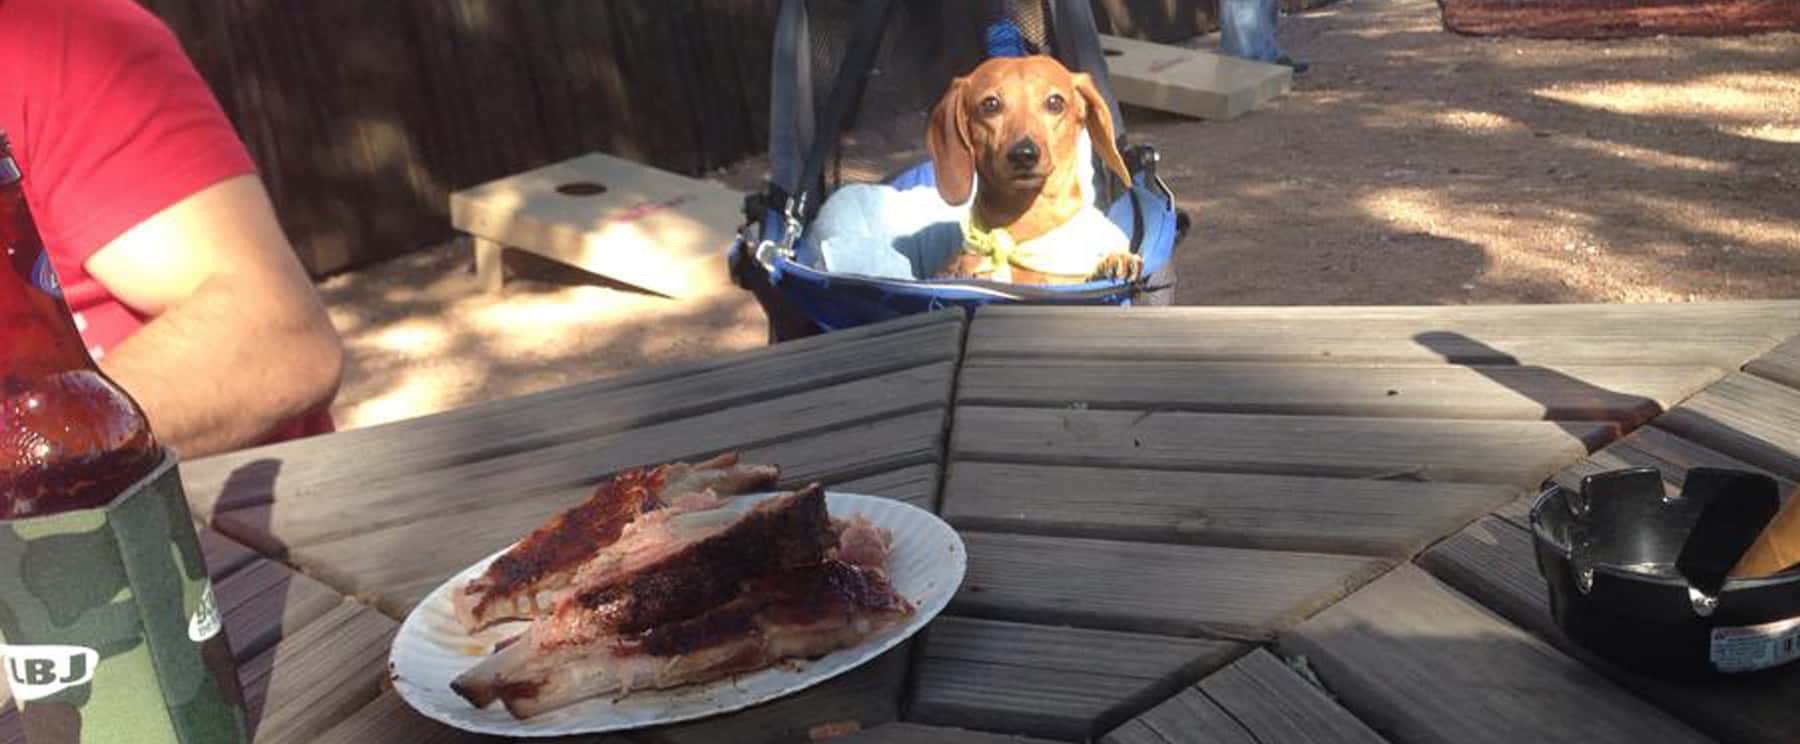 a puppy eying some ribs